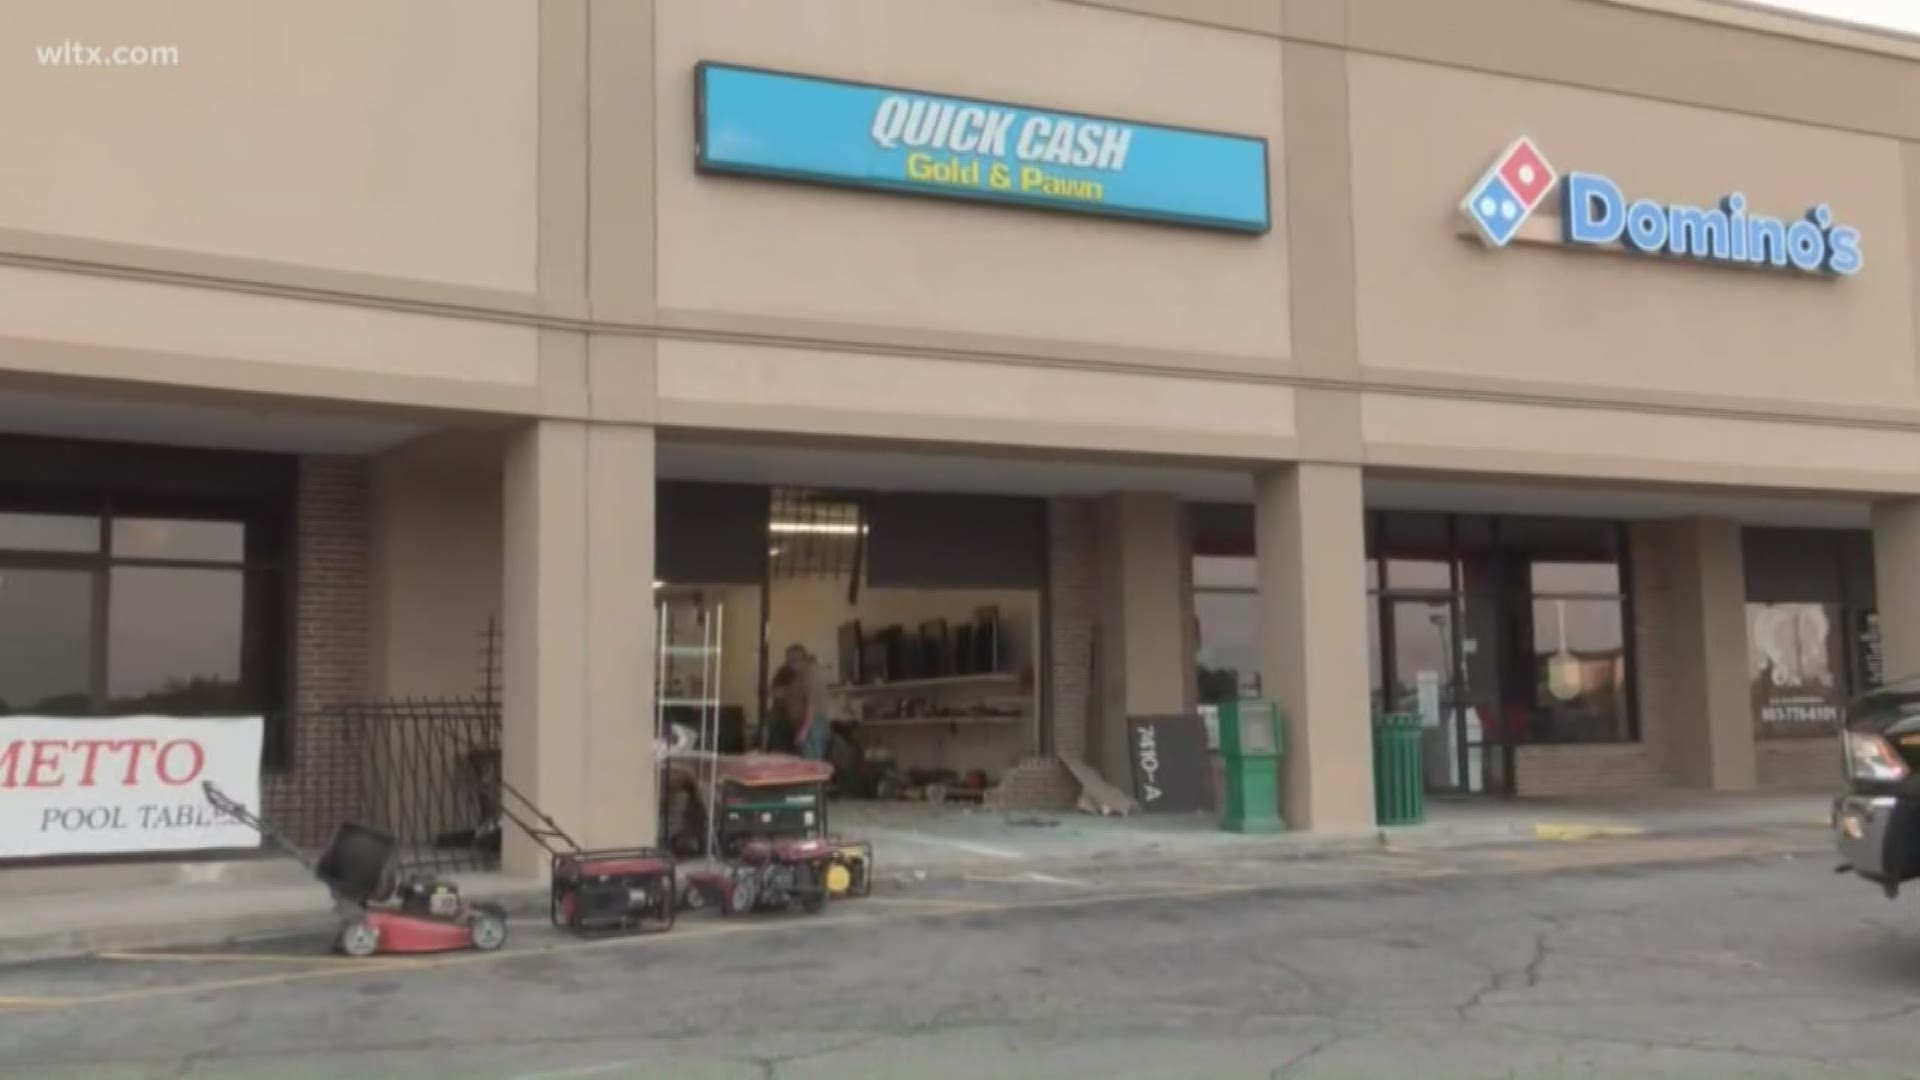 Police say a vehicle crashed into Quick Cash Gold & Pawn near Rush's in the 7400 block of Garners Ferry Road in Columbia early Thursday morning.